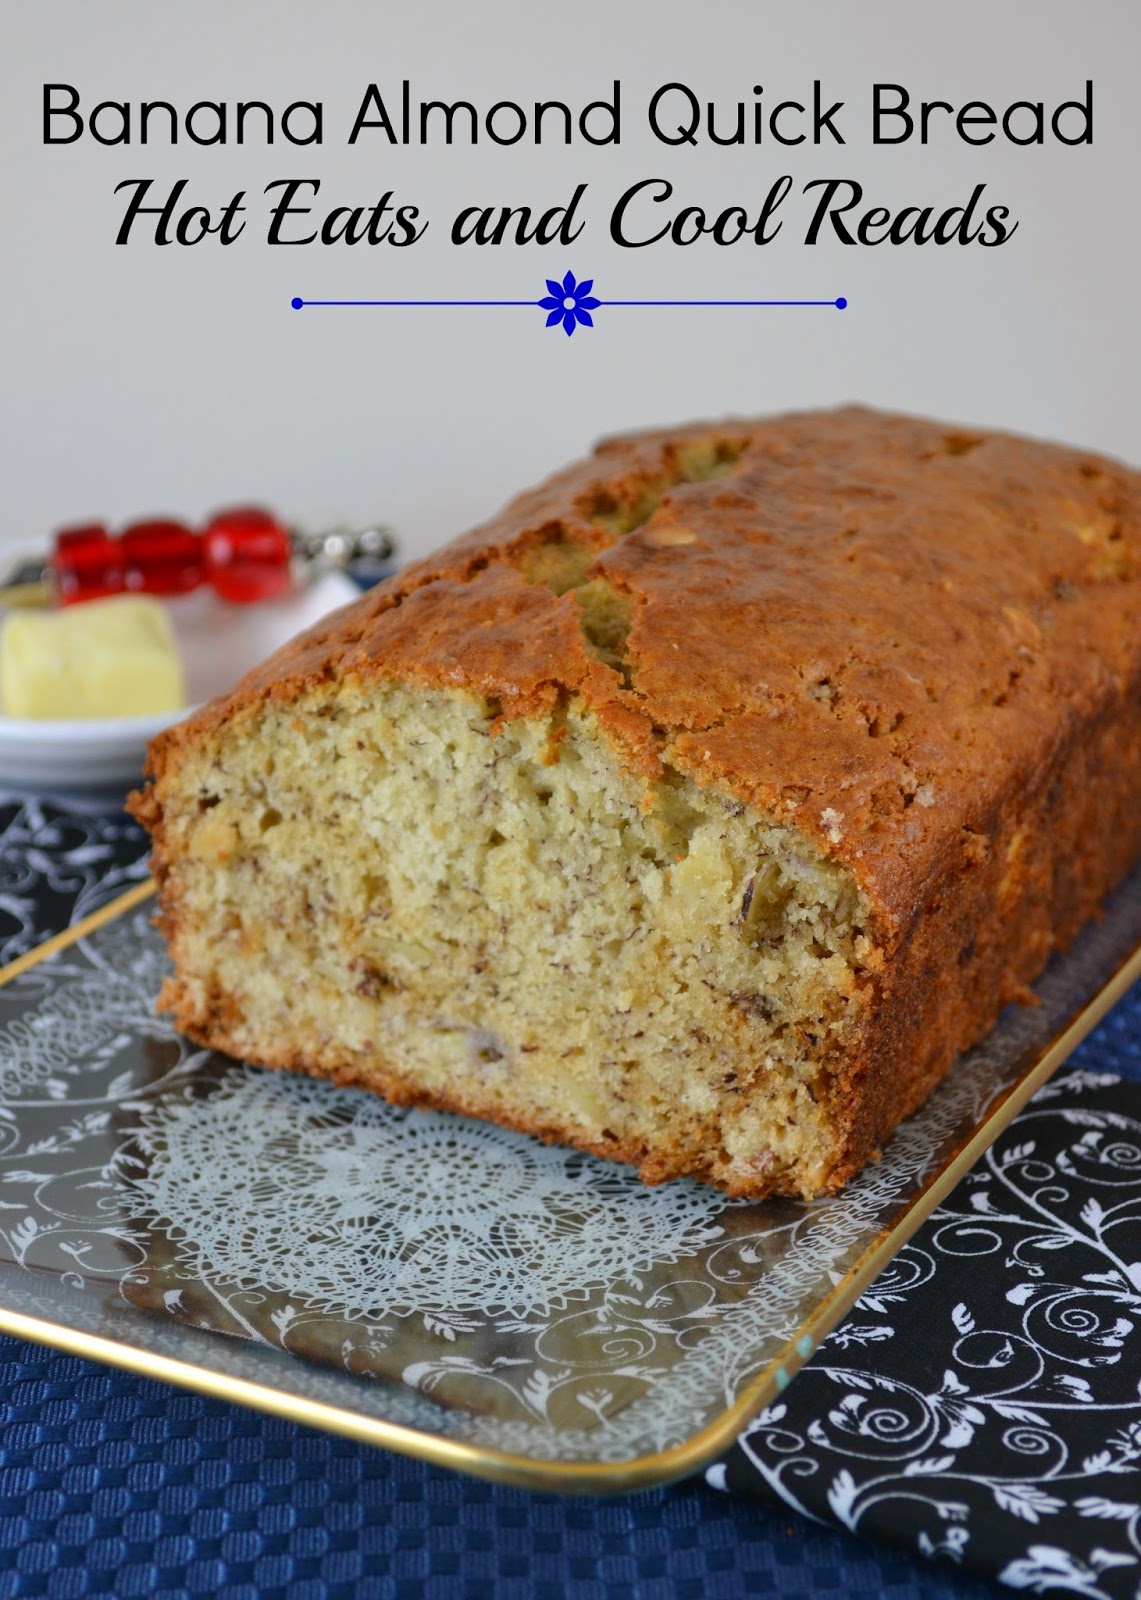 Hot Eats and Cool Reads: Banana Almond Quick Bread Recipe